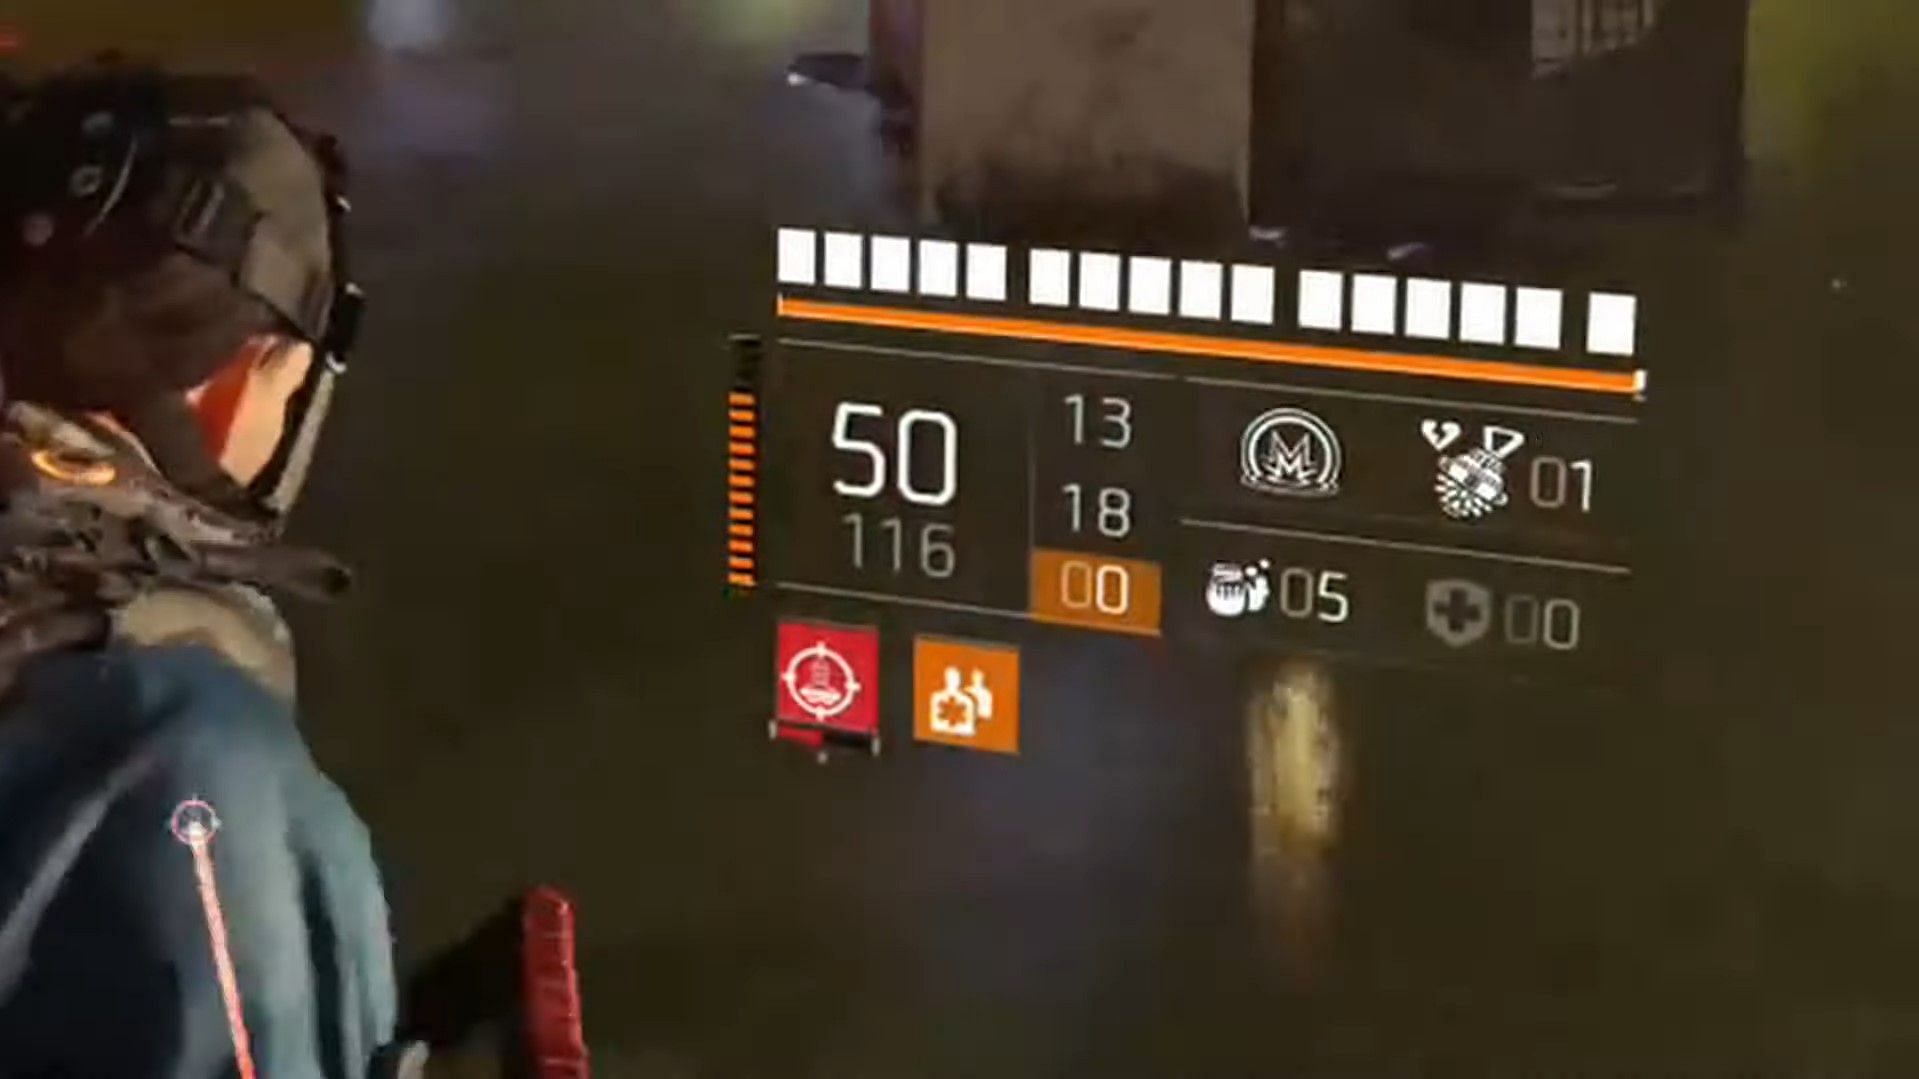 The Division 2 SHD Exposed debuff (Image via Ubisoft)